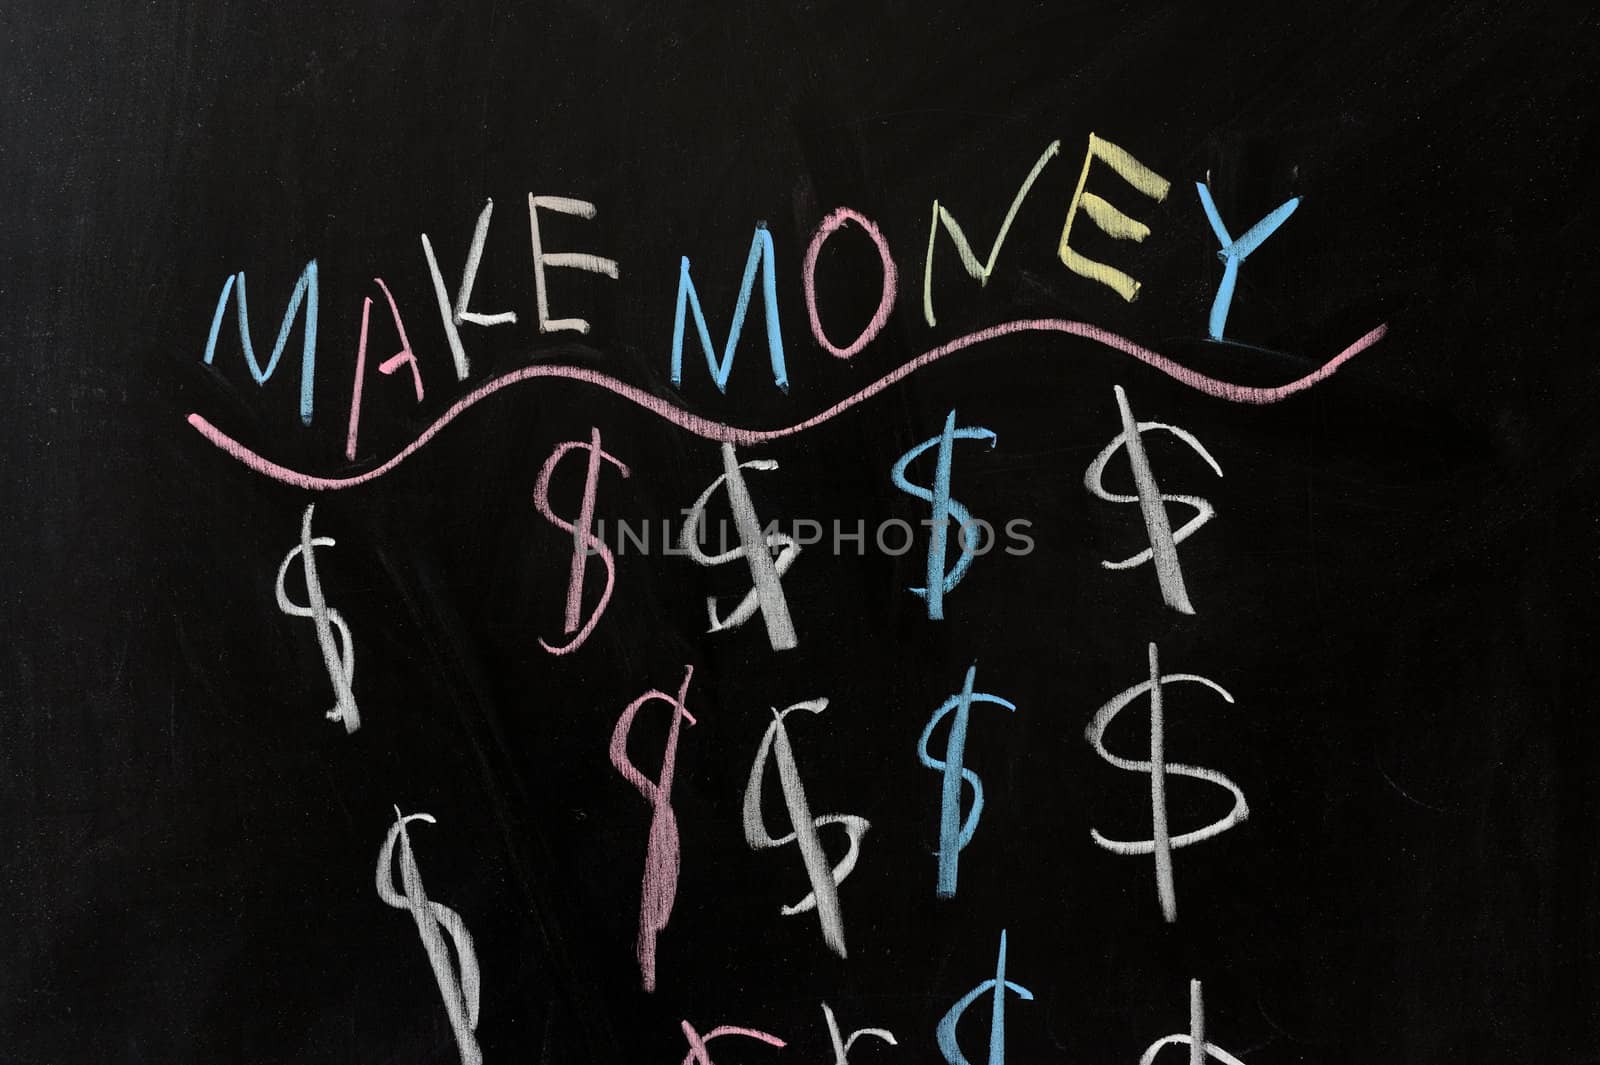 Make money - conceptional chalk drawing